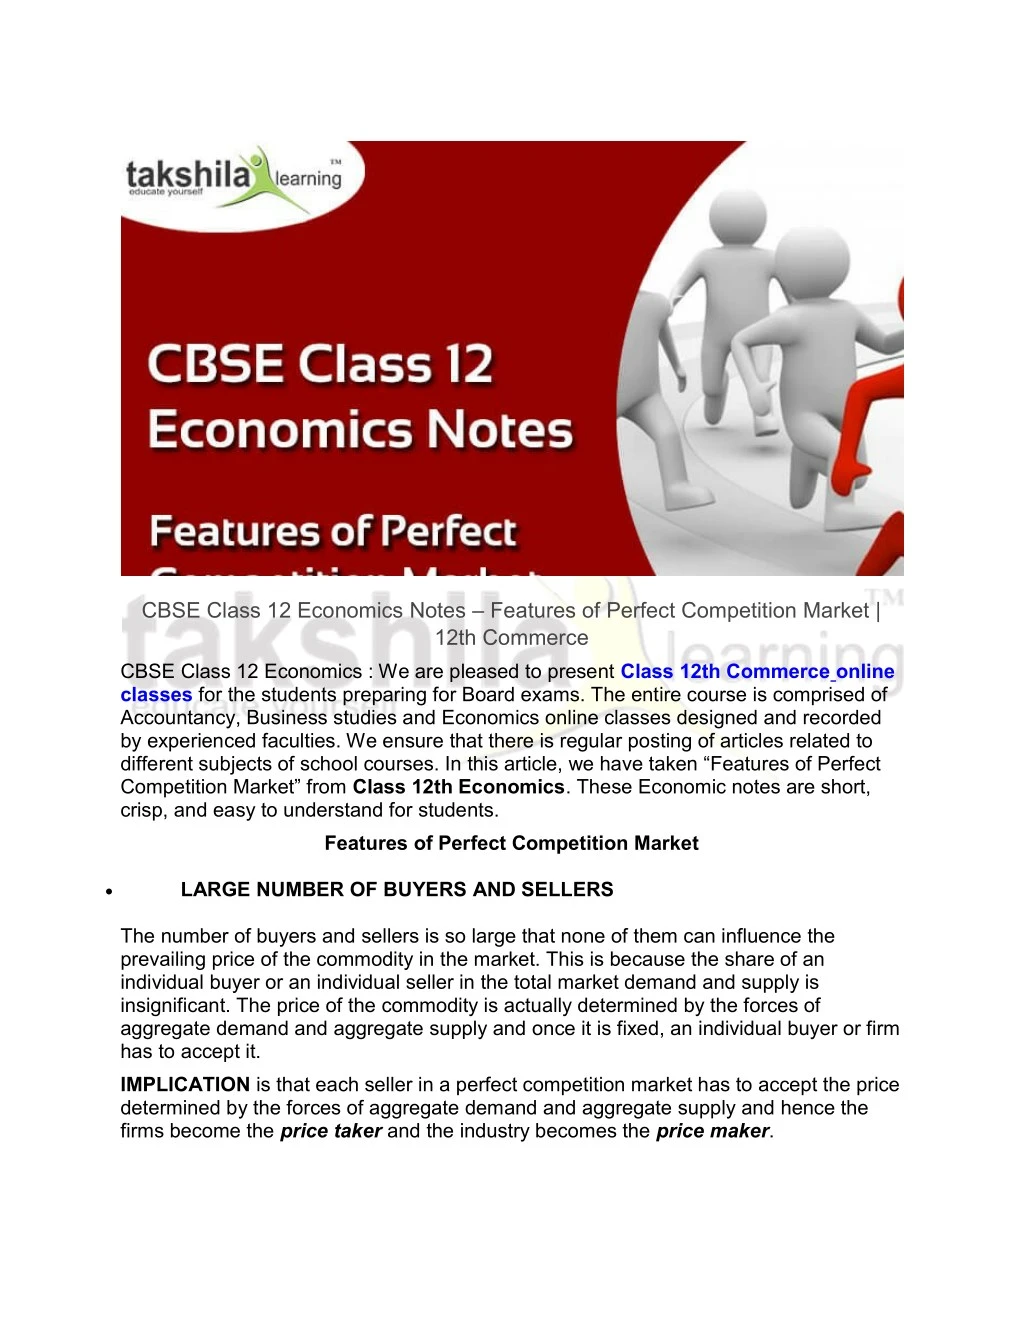 cbse class 12 economics notes features of perfect